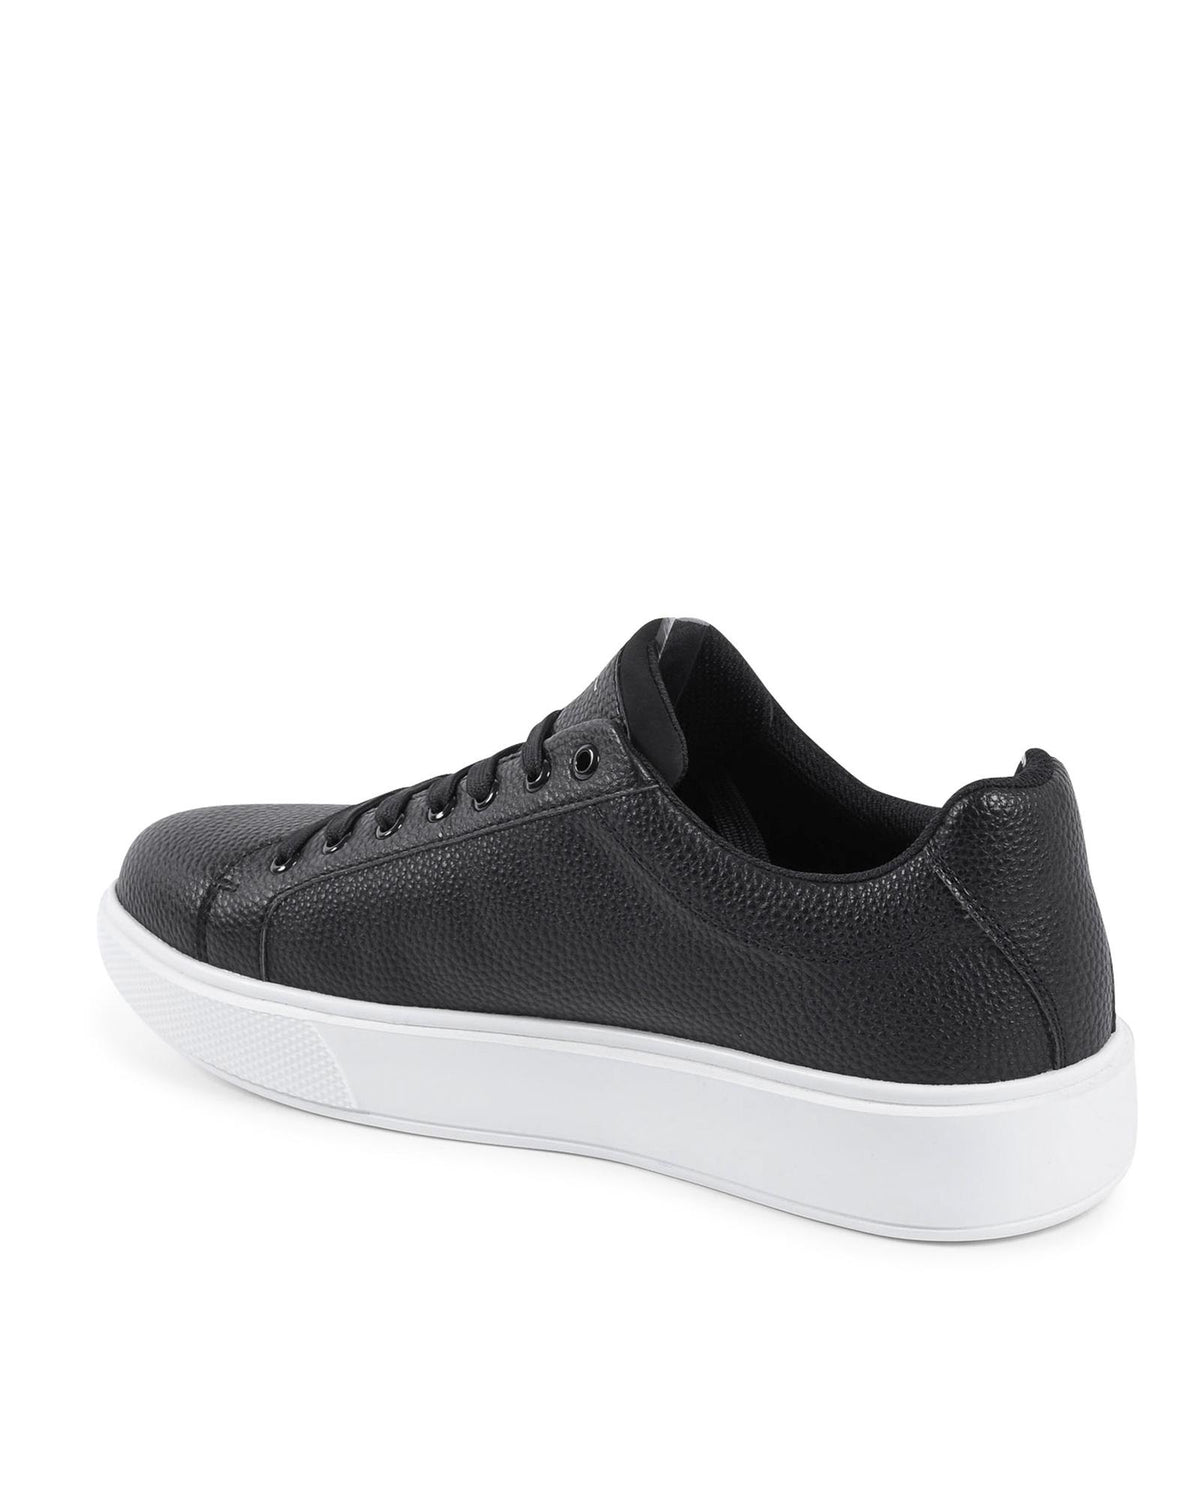 Synthetic Leather Rubber Sole Sneaker - 41 EU